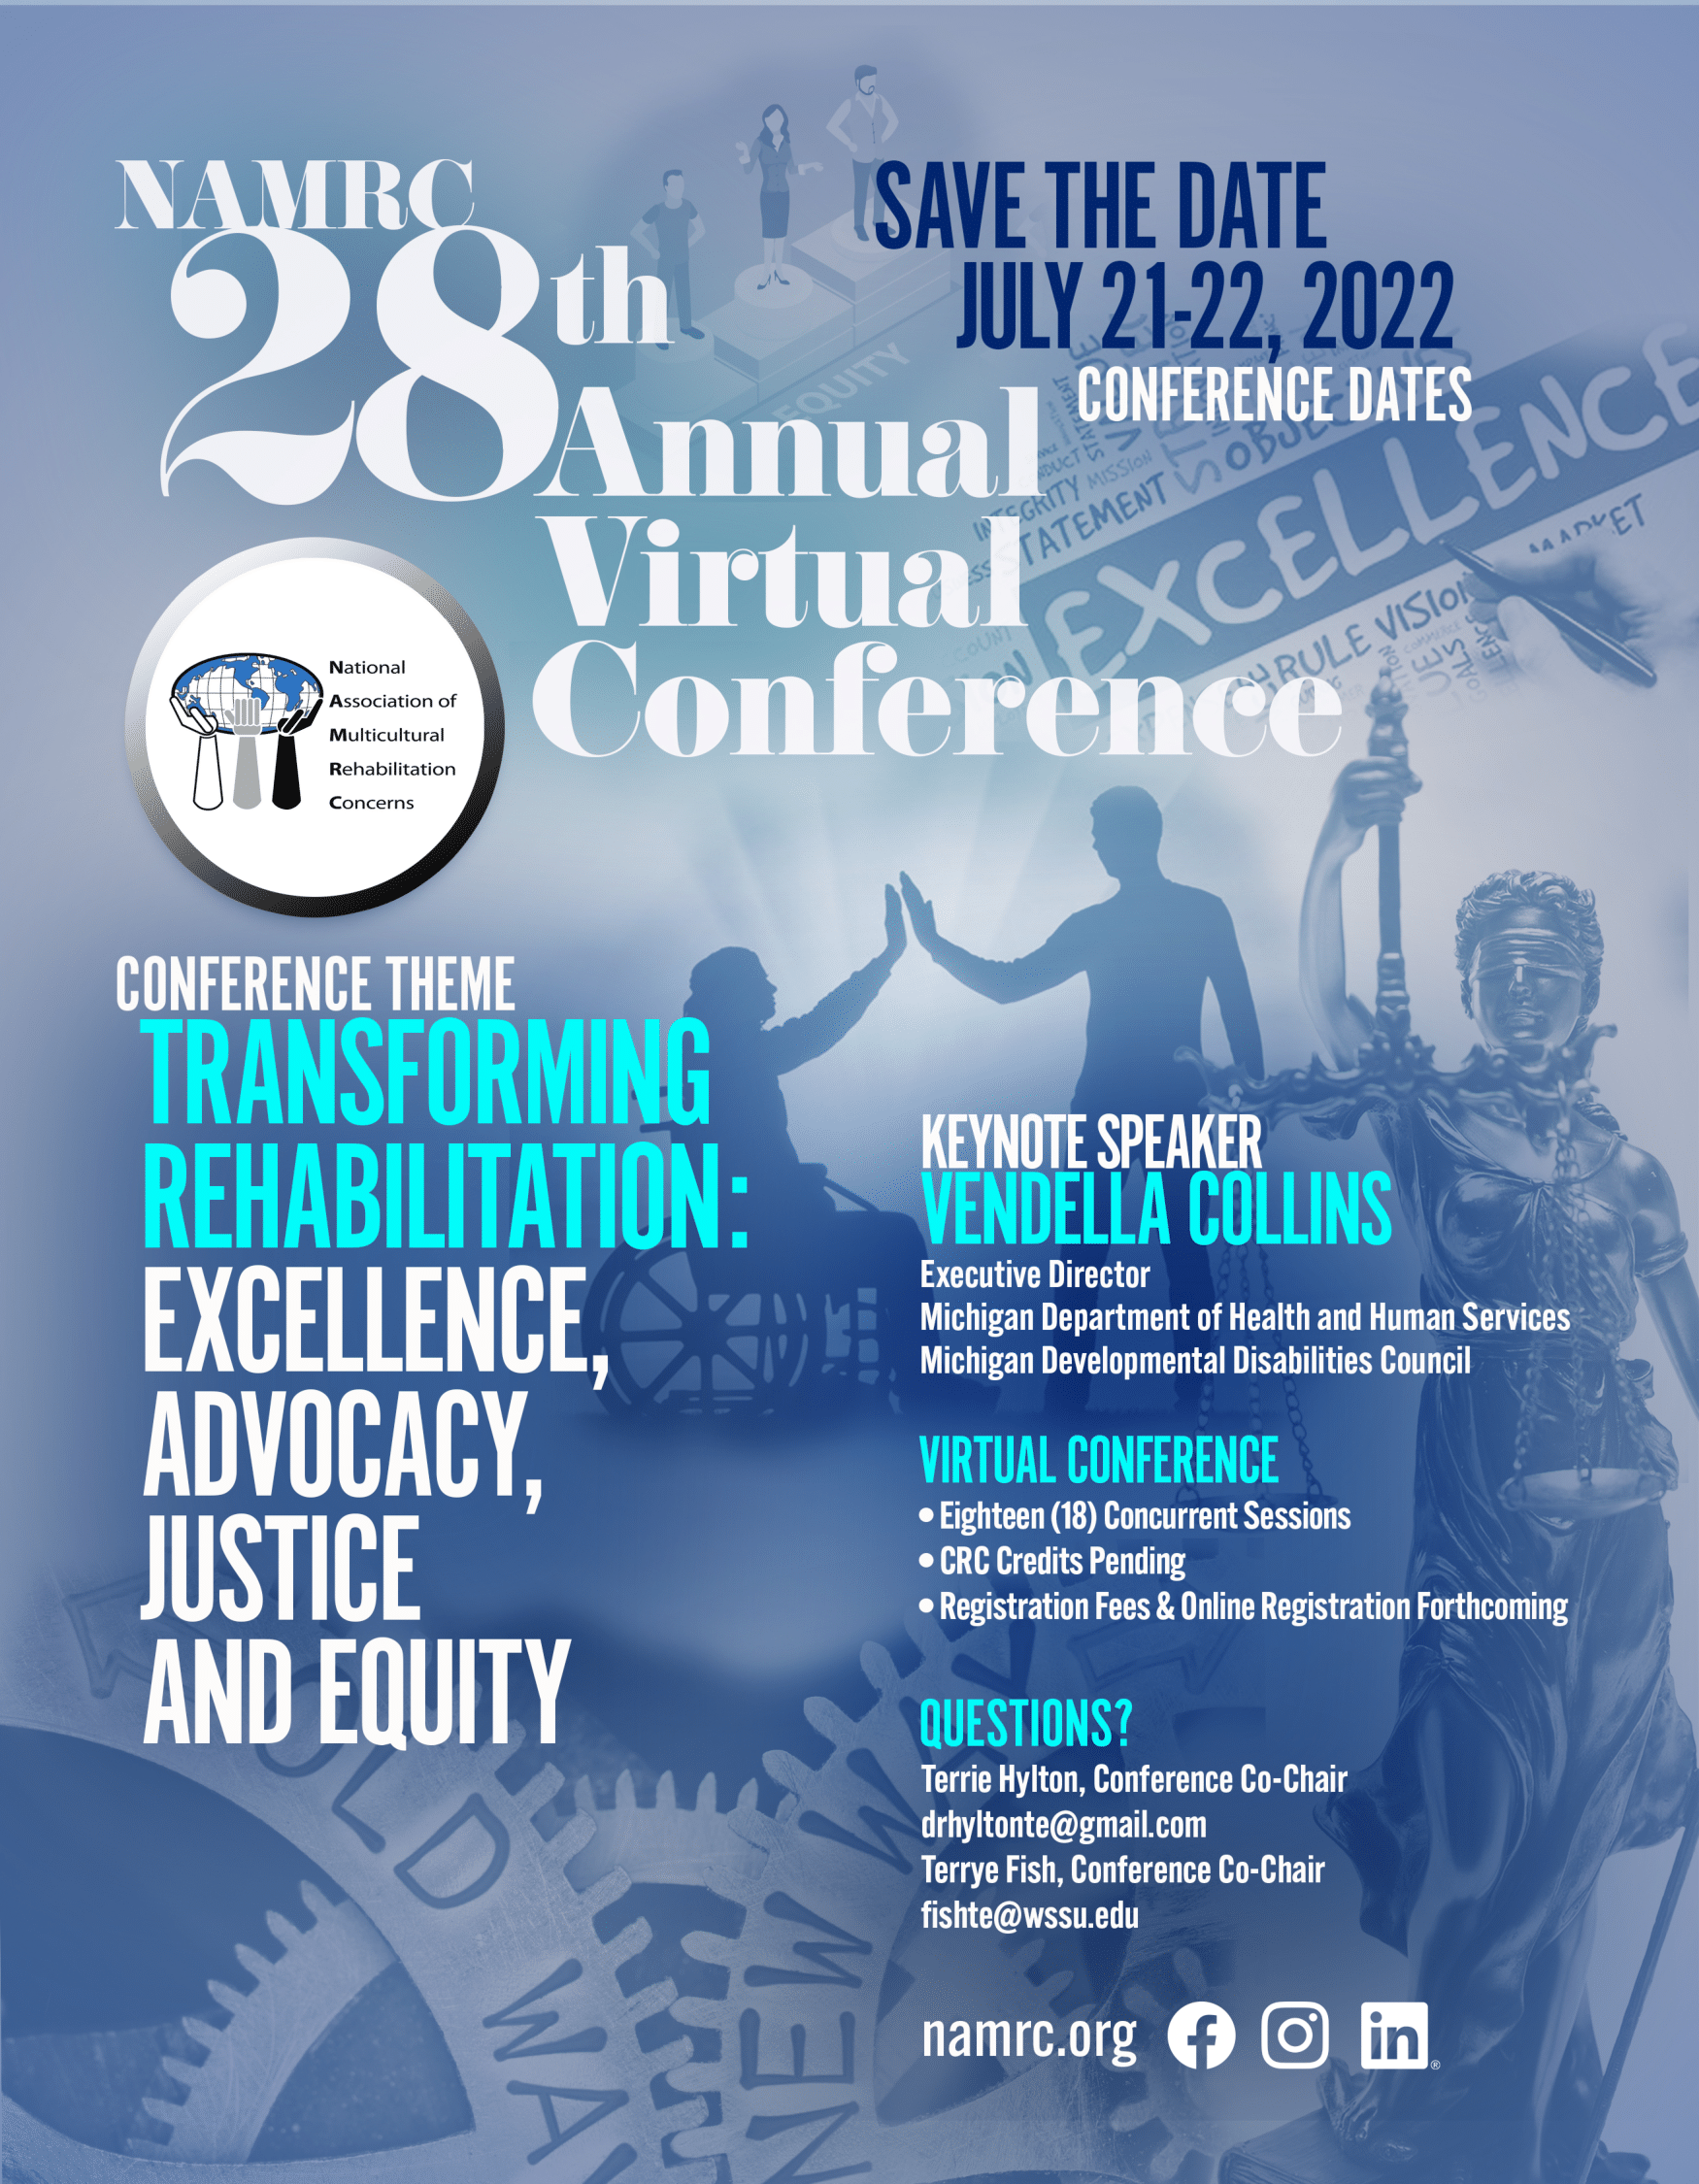 Image of a flyer used: NAMRC 28TH annual Virtual Conference   July 21-22,  2022,  Conference Theme,  Transforming Rehabilitation Excellence, Advocacy, Justice, and Equity.  